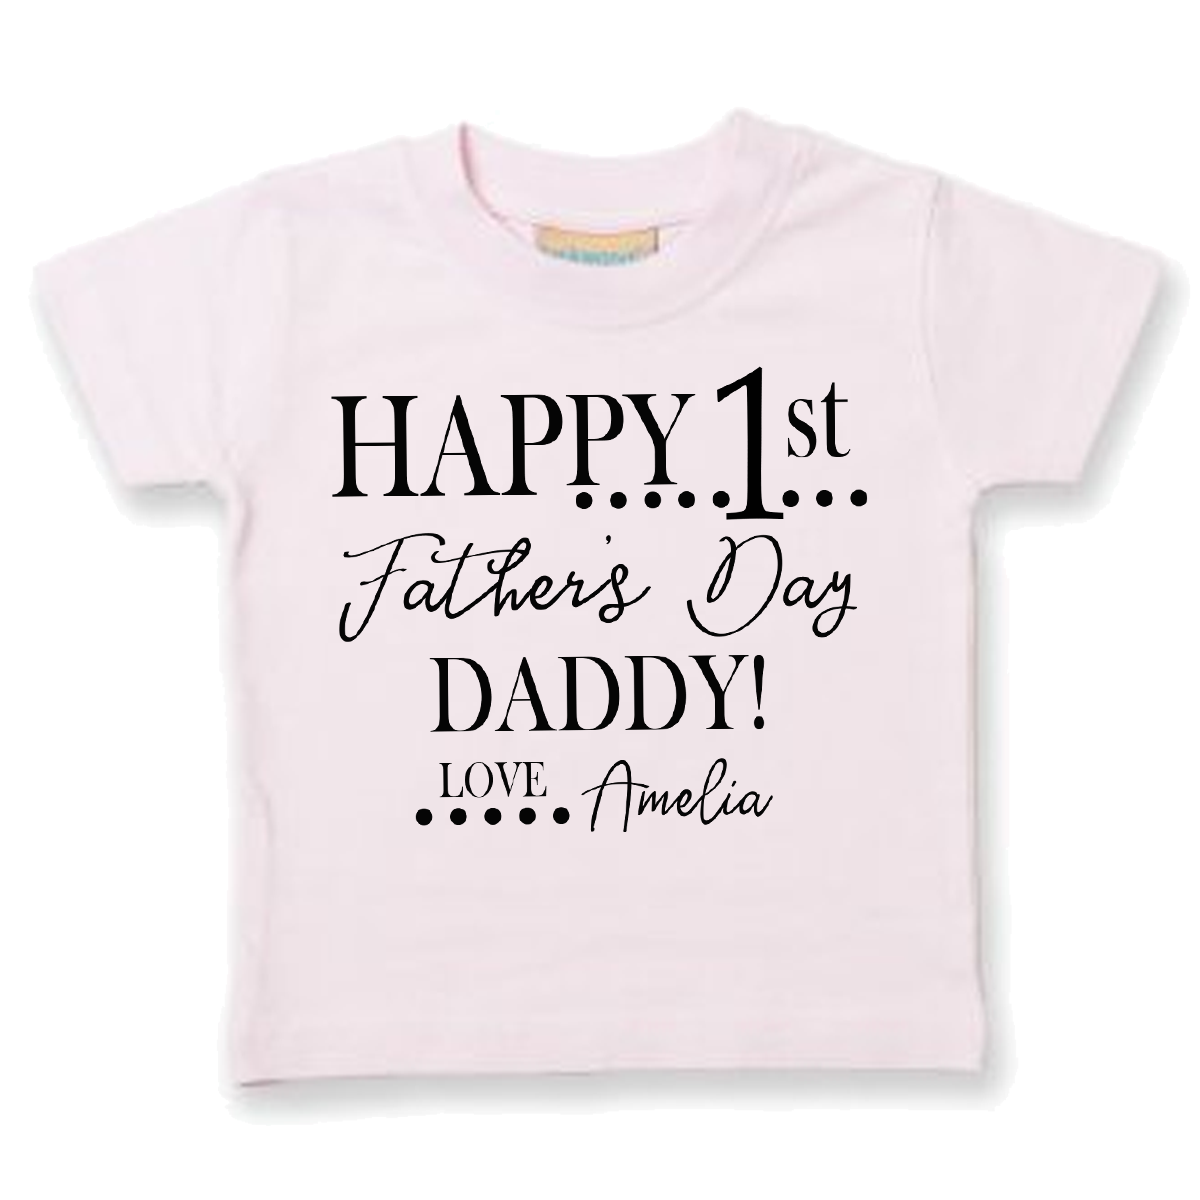 Happy 1st Father's Day Daddy - Personalised baby t-shirt